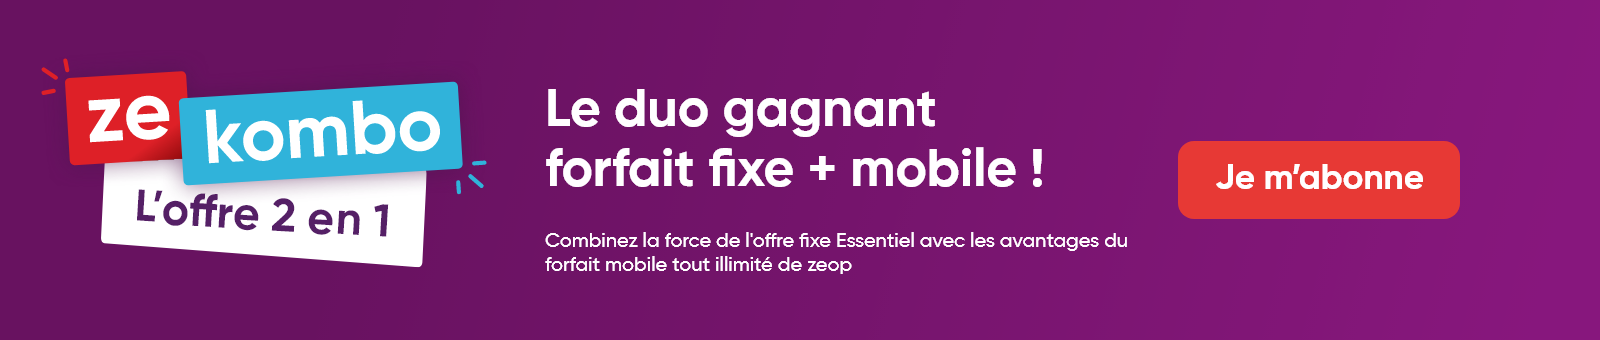 Le duo gagnant forfait fixe + mobile !